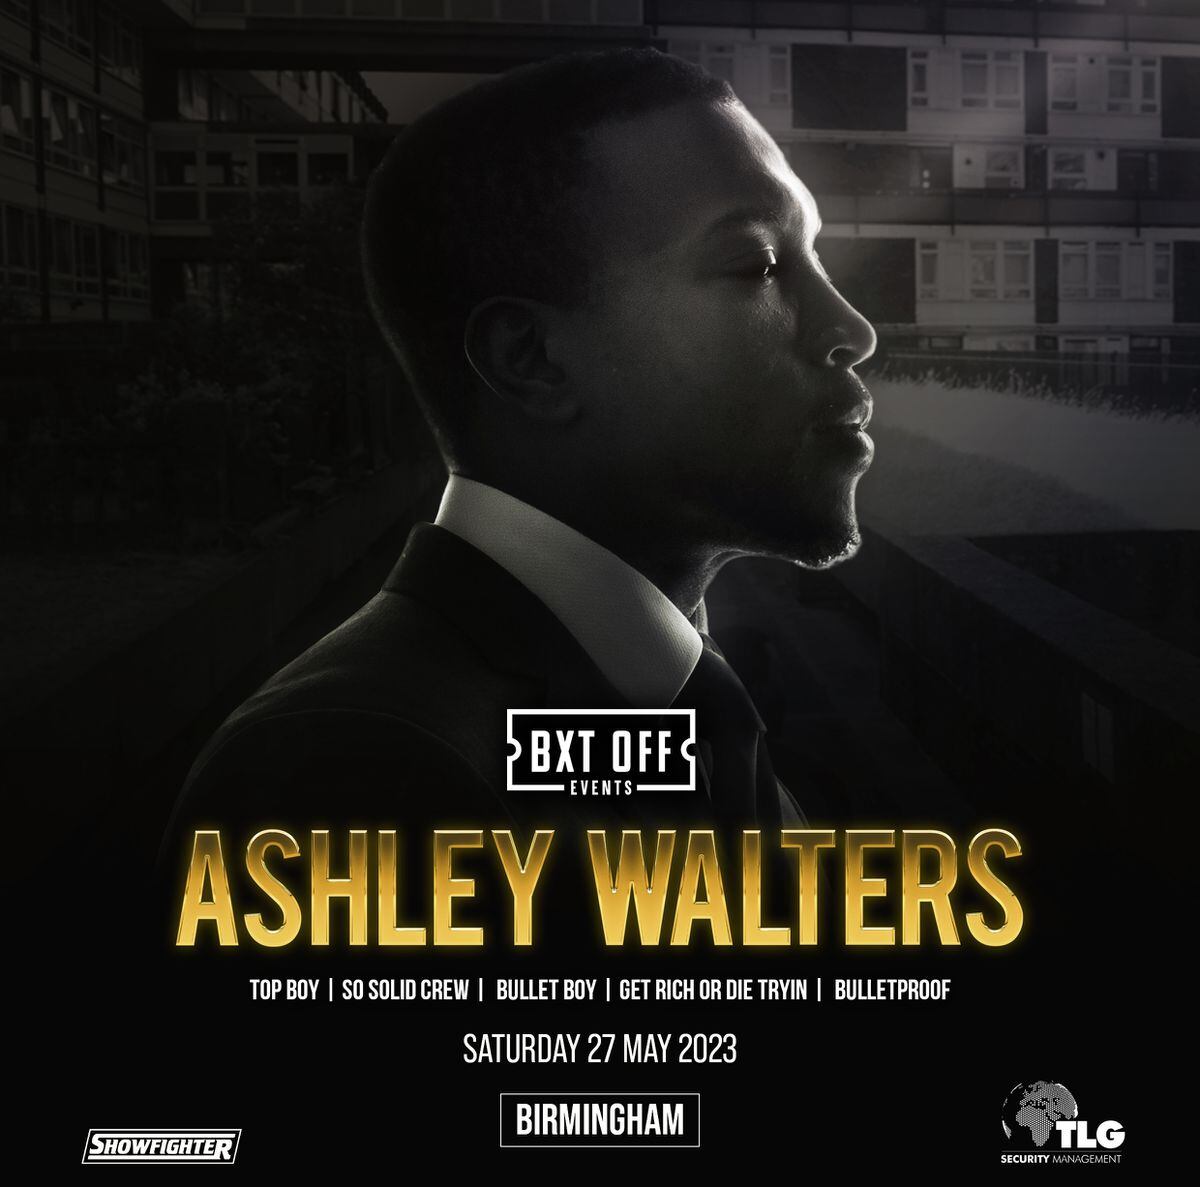 Ashley Walters event being held by BXT OFF Events